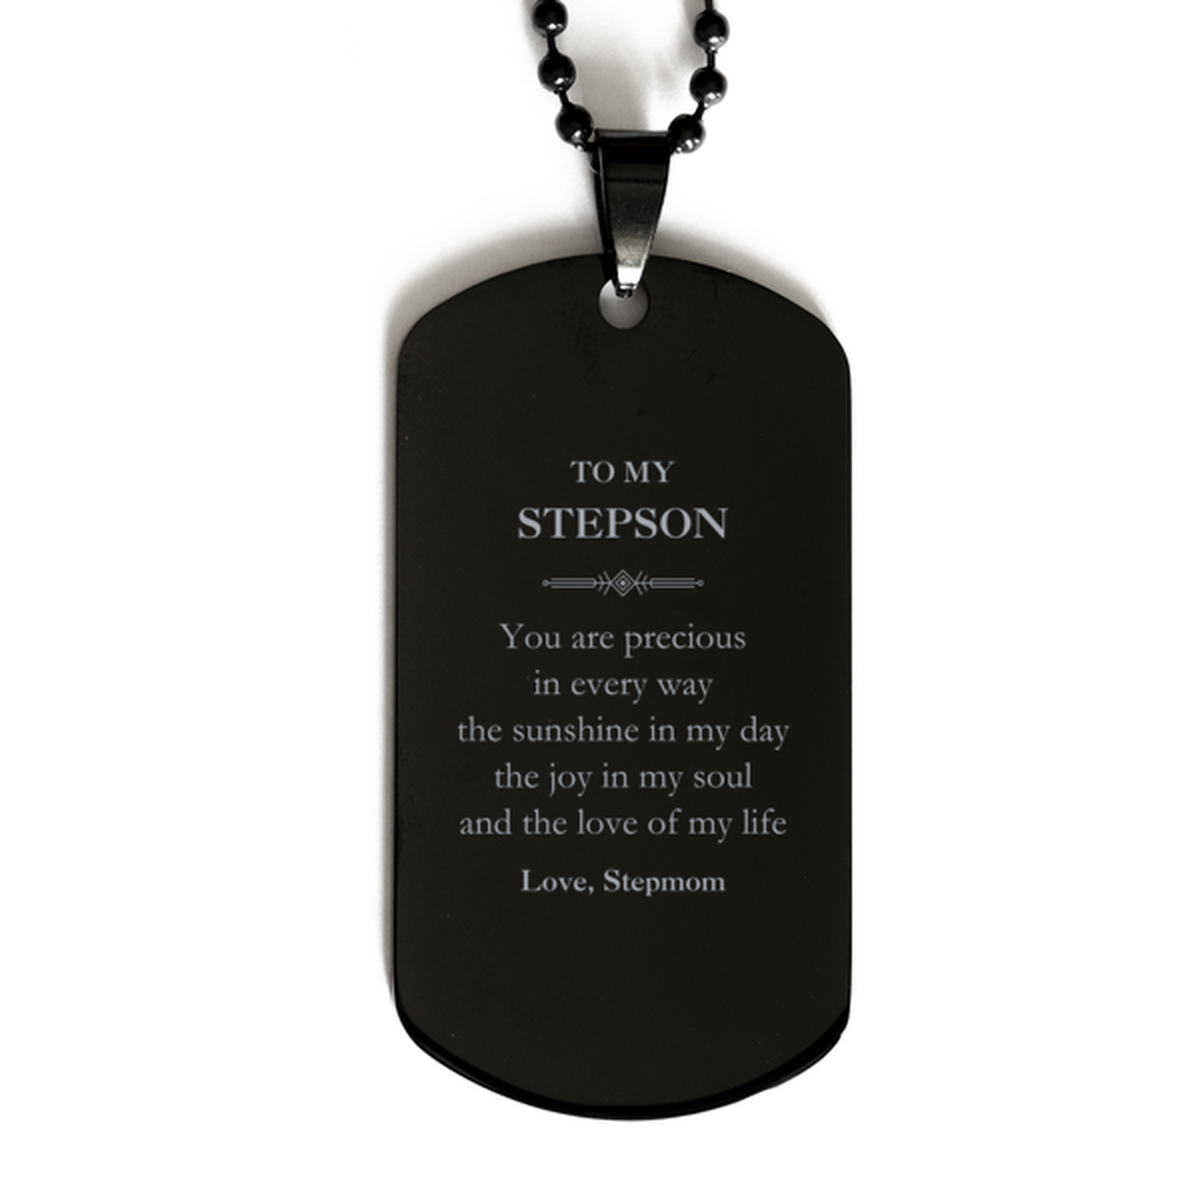 Graduation Gifts for Stepson Black Dog Tag Present from Stepmom, Christmas Stepson Birthday Gifts Stepson You are precious in every way the sunshine in my day. Love, Stepmom